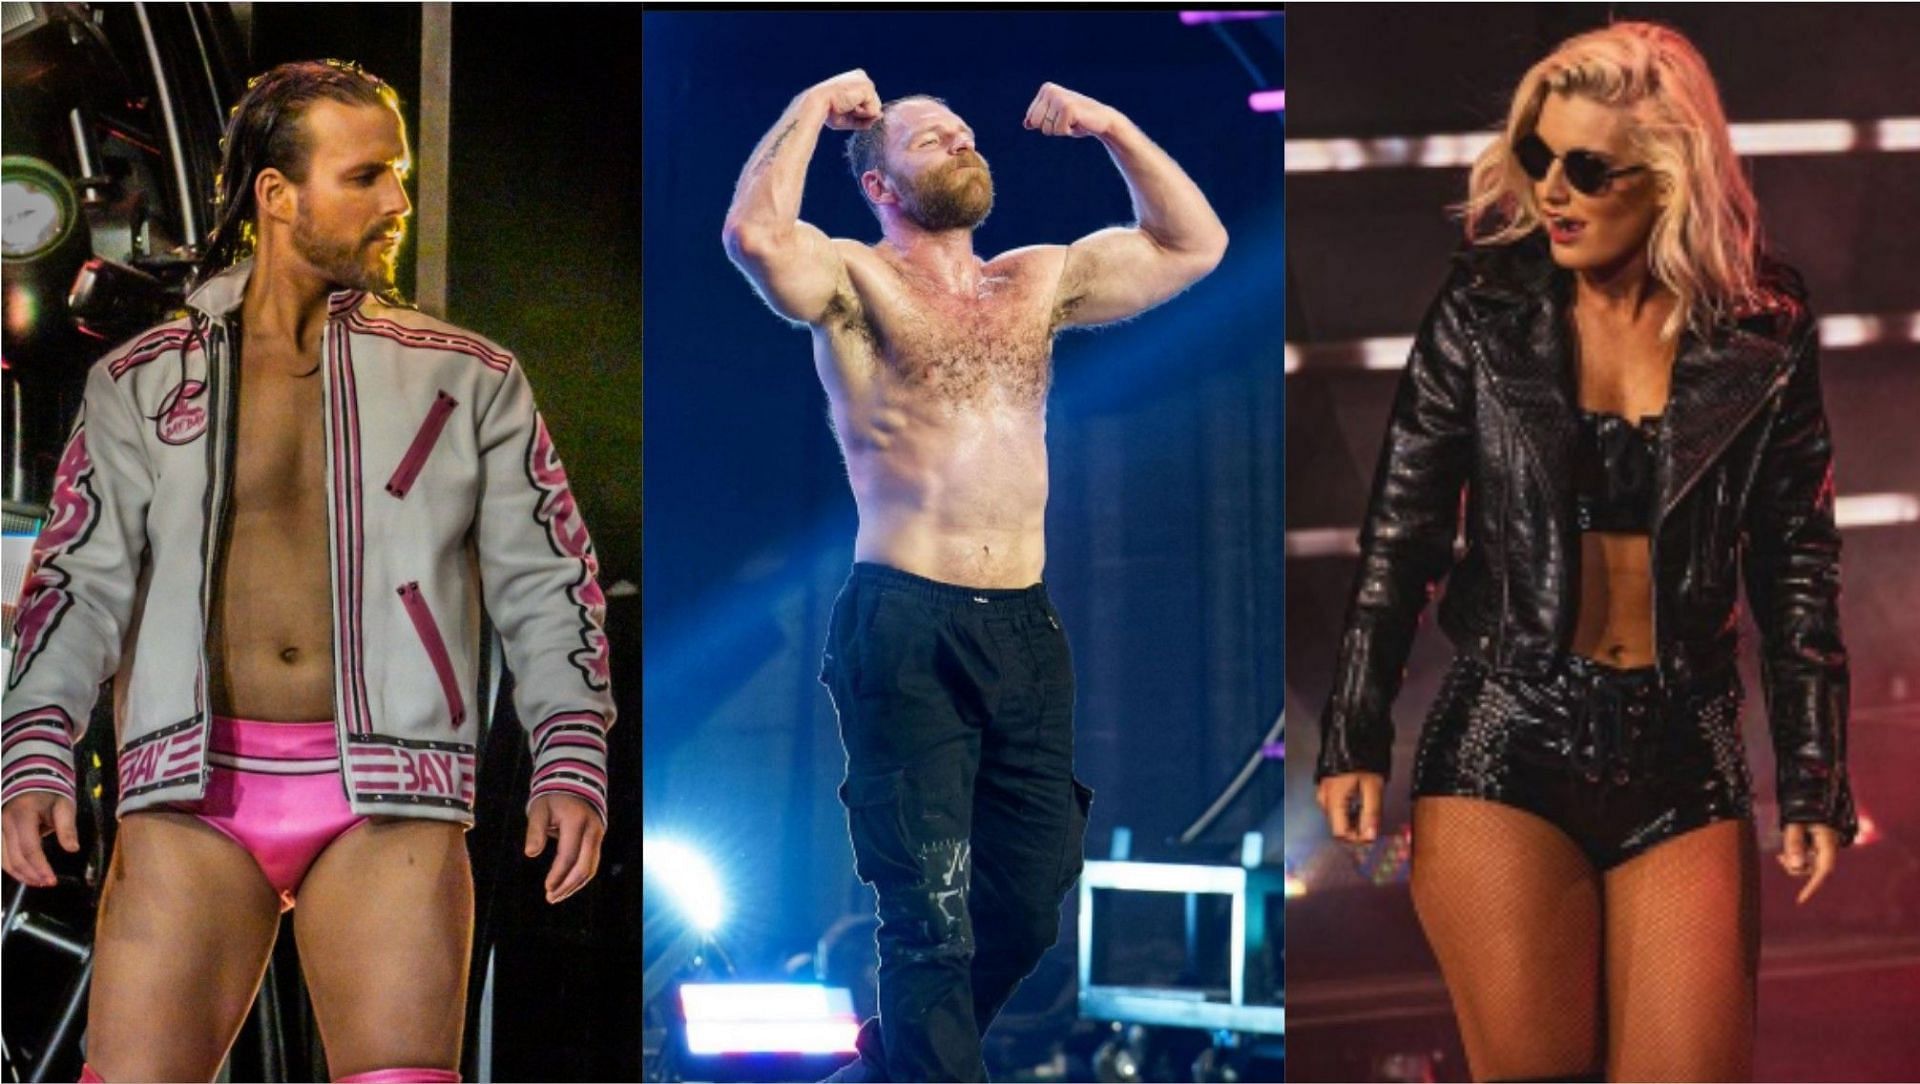 What went down on AEW Dynamite this week?